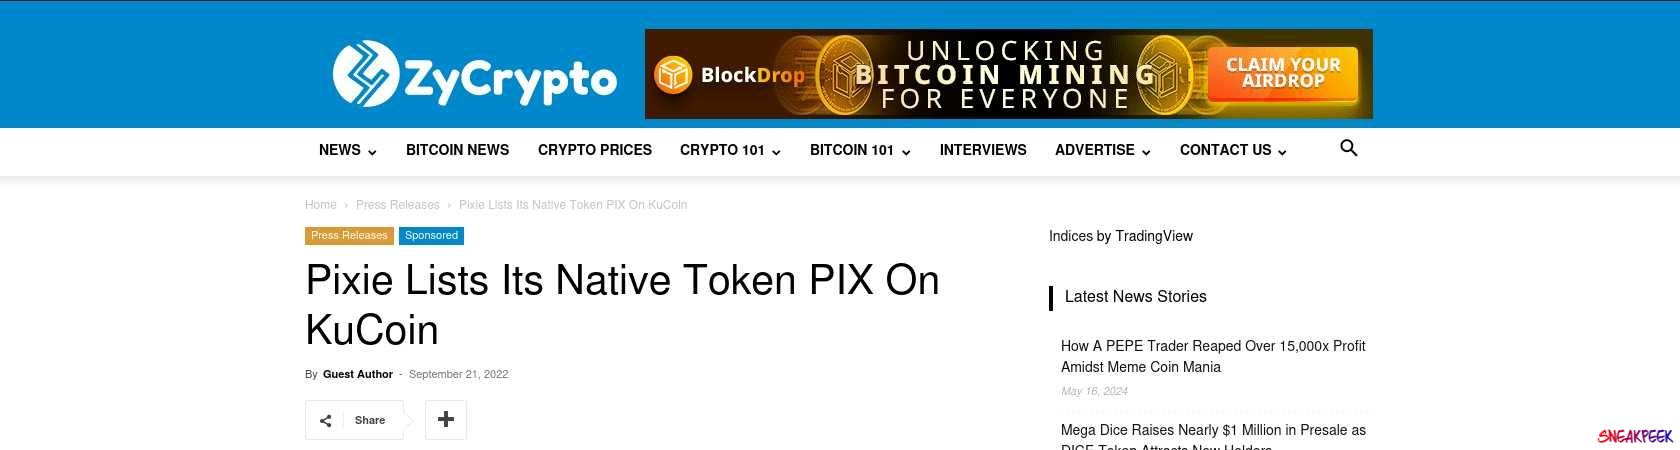 Read the full Article:  ⭲ Pixie Lists Its Native Token PIX On KuCoin